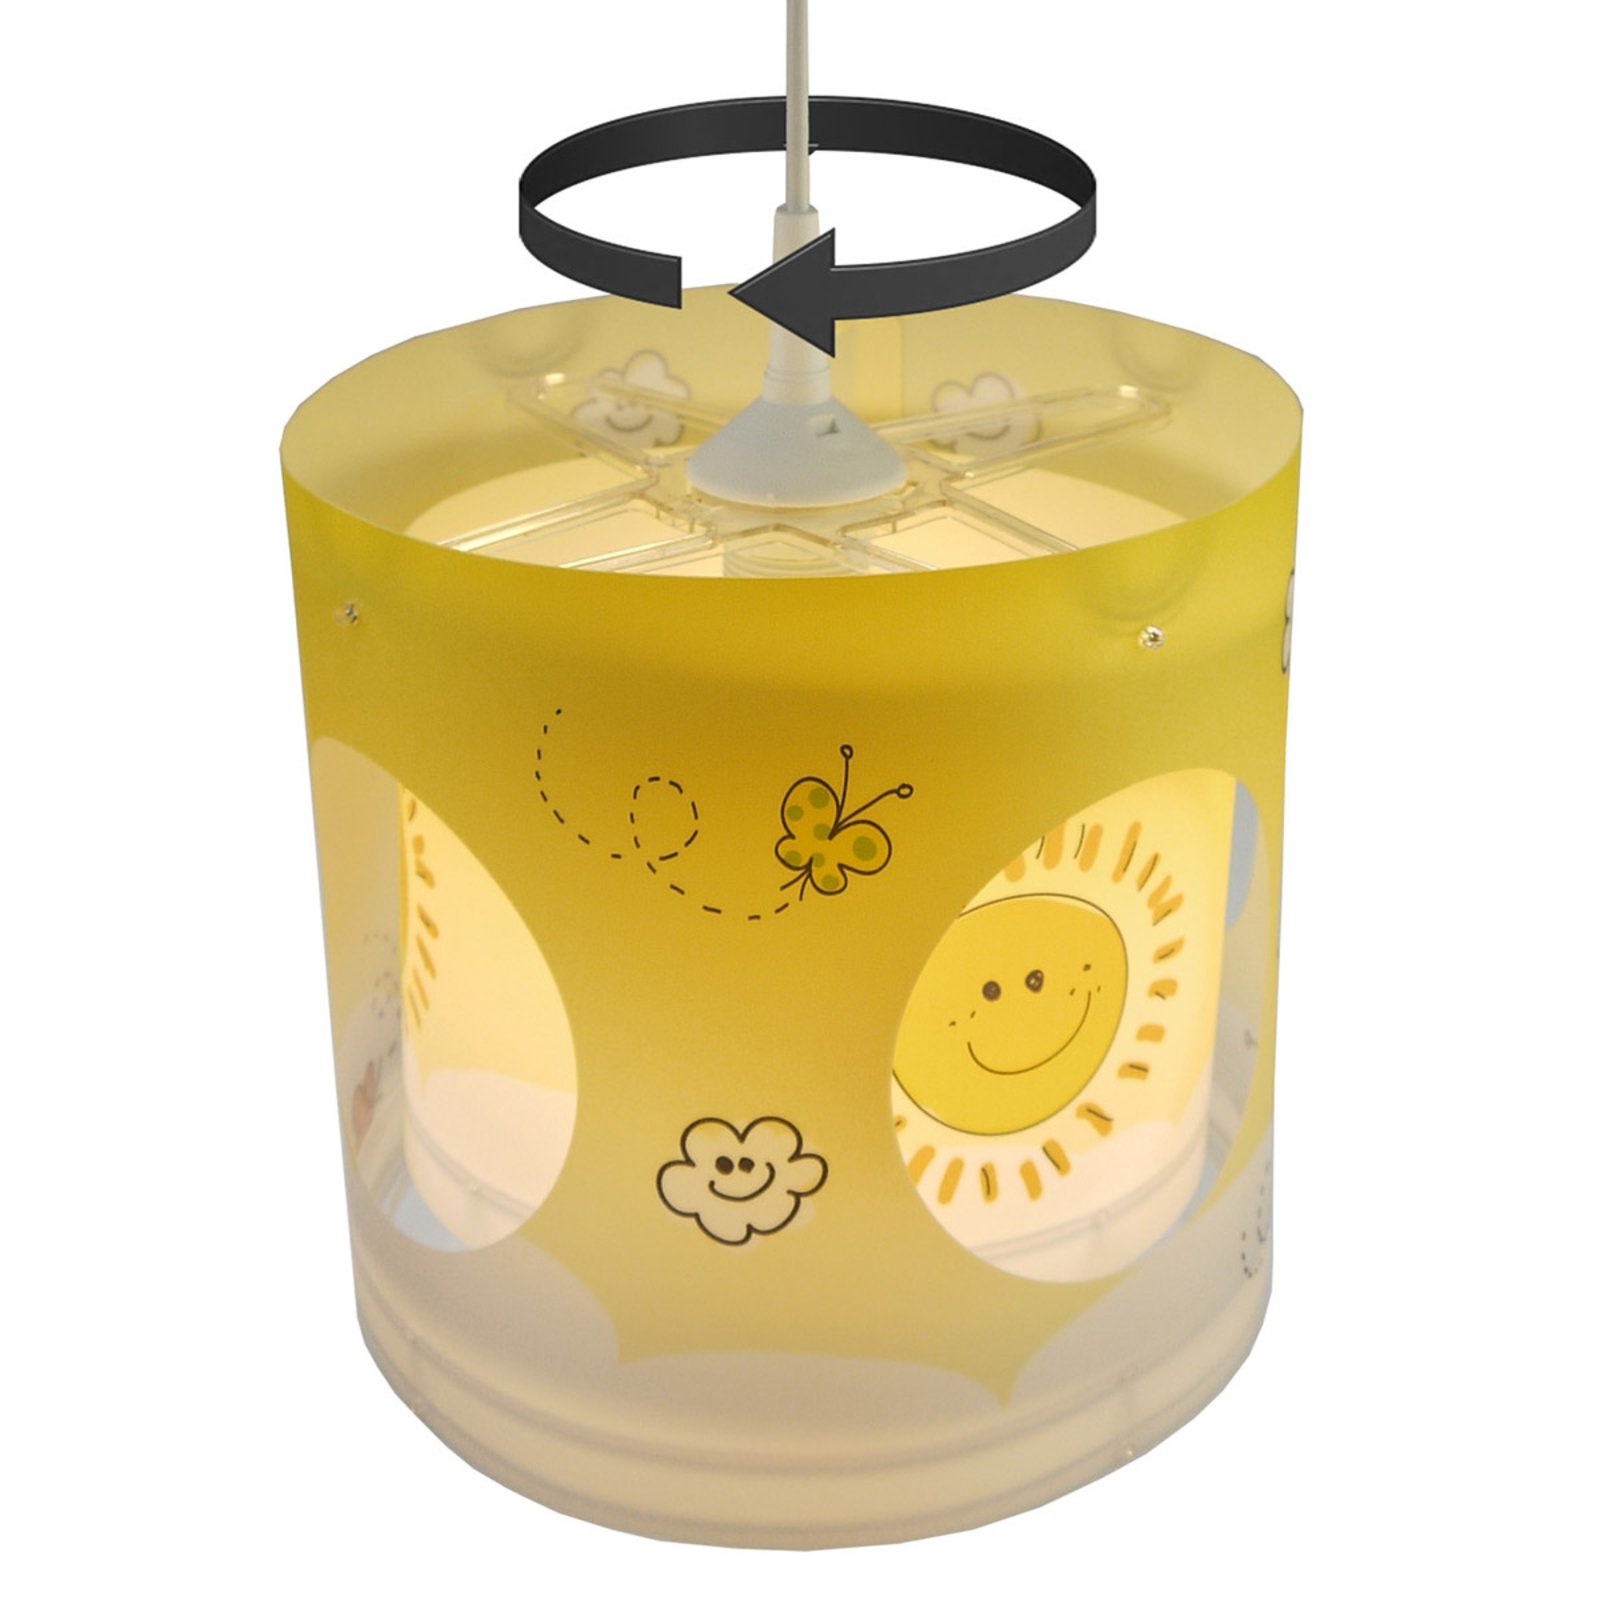 Sunny rotating pendant light for a child’s room